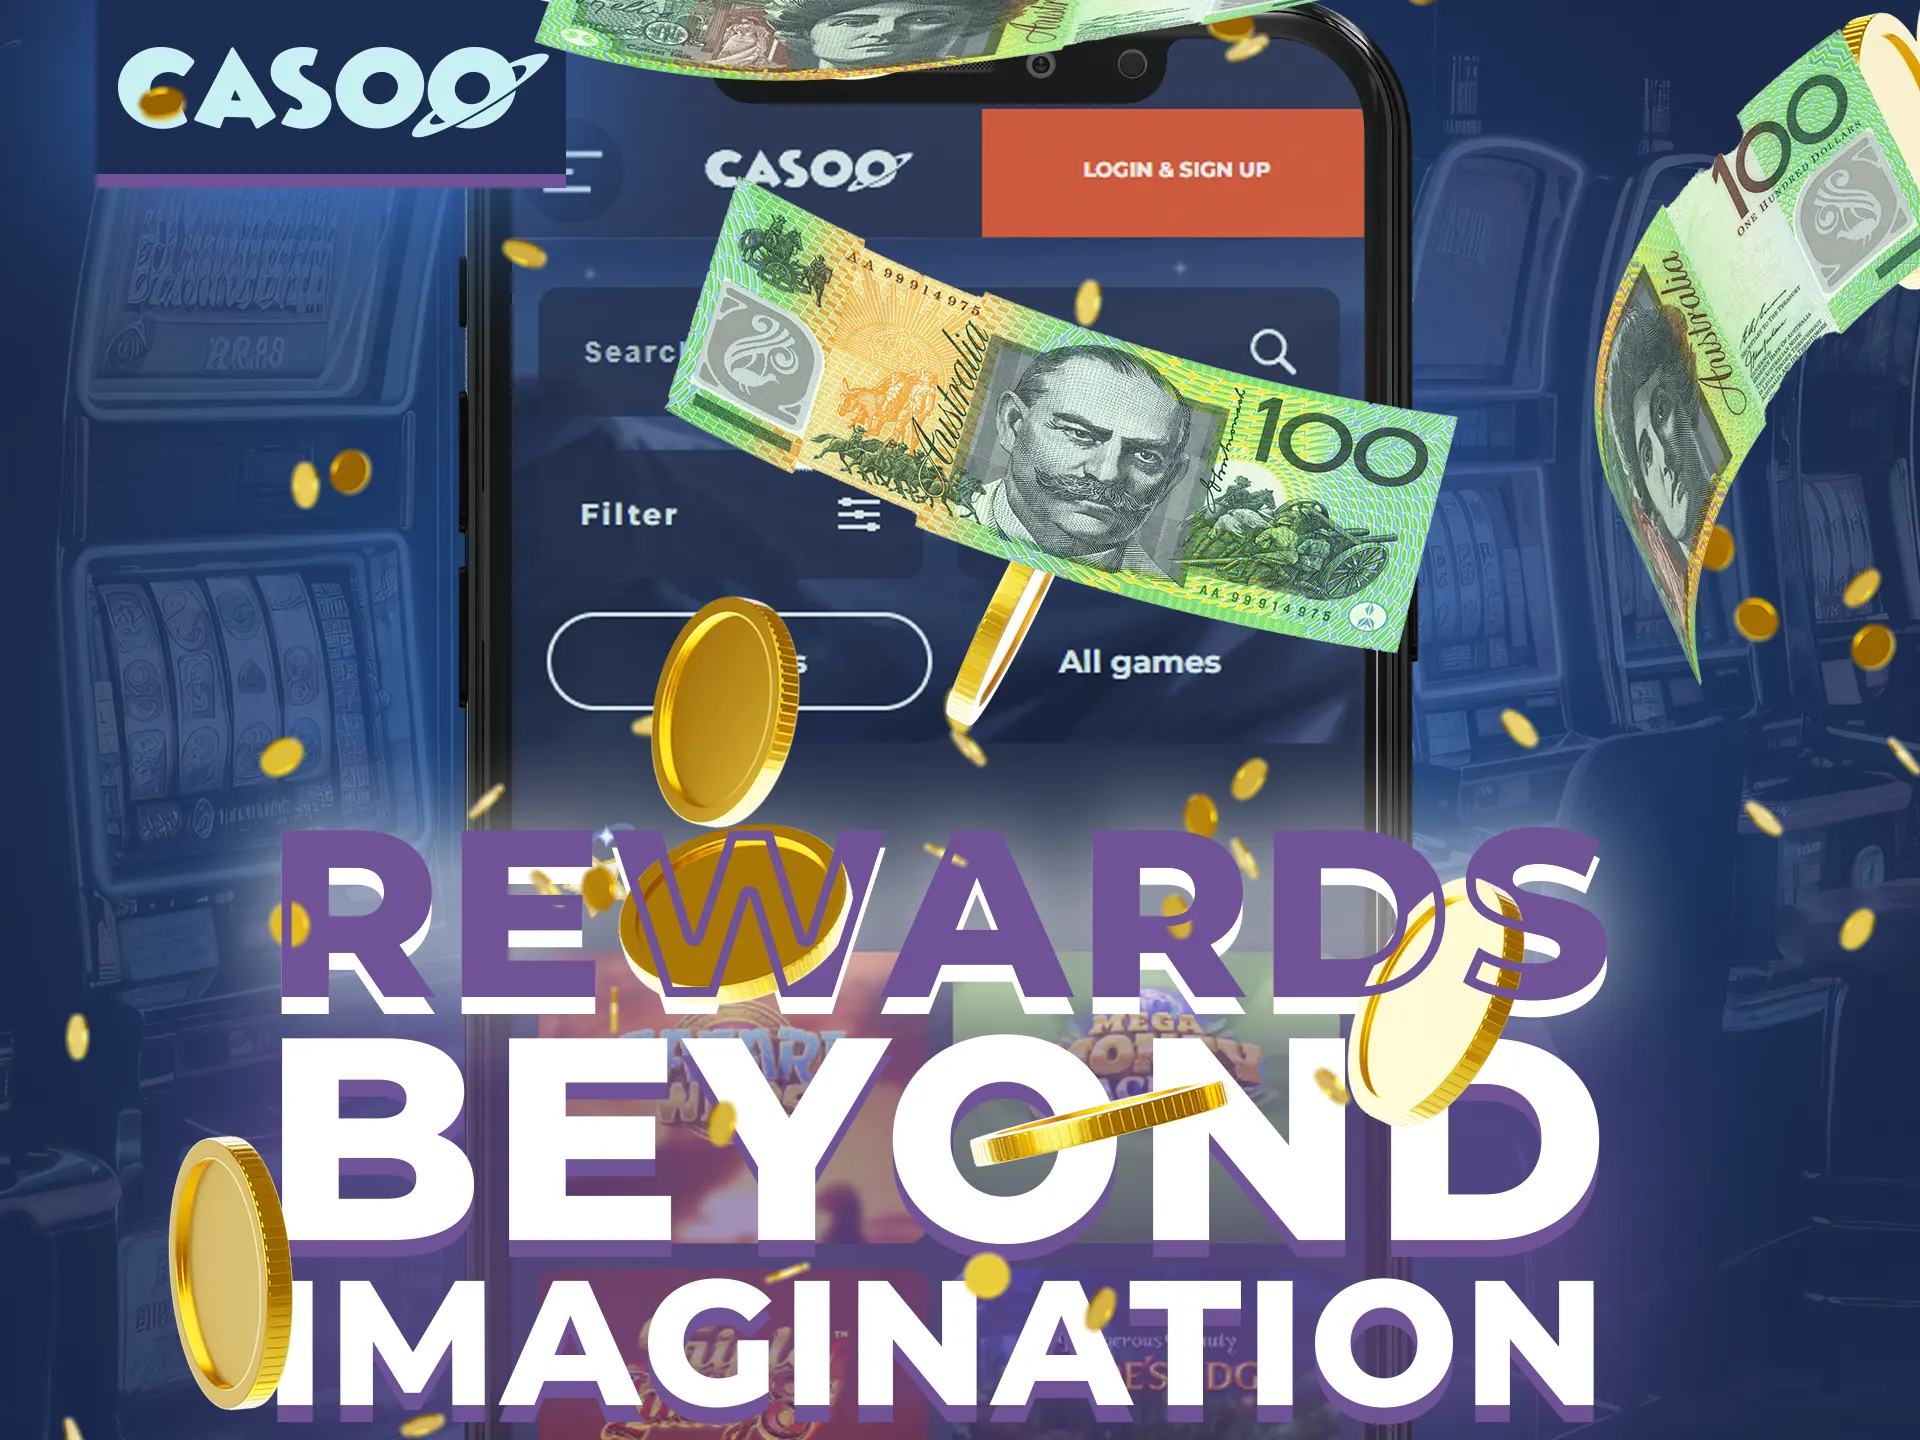 Experience crazy, beyond imagination prizes at Casoo casino.